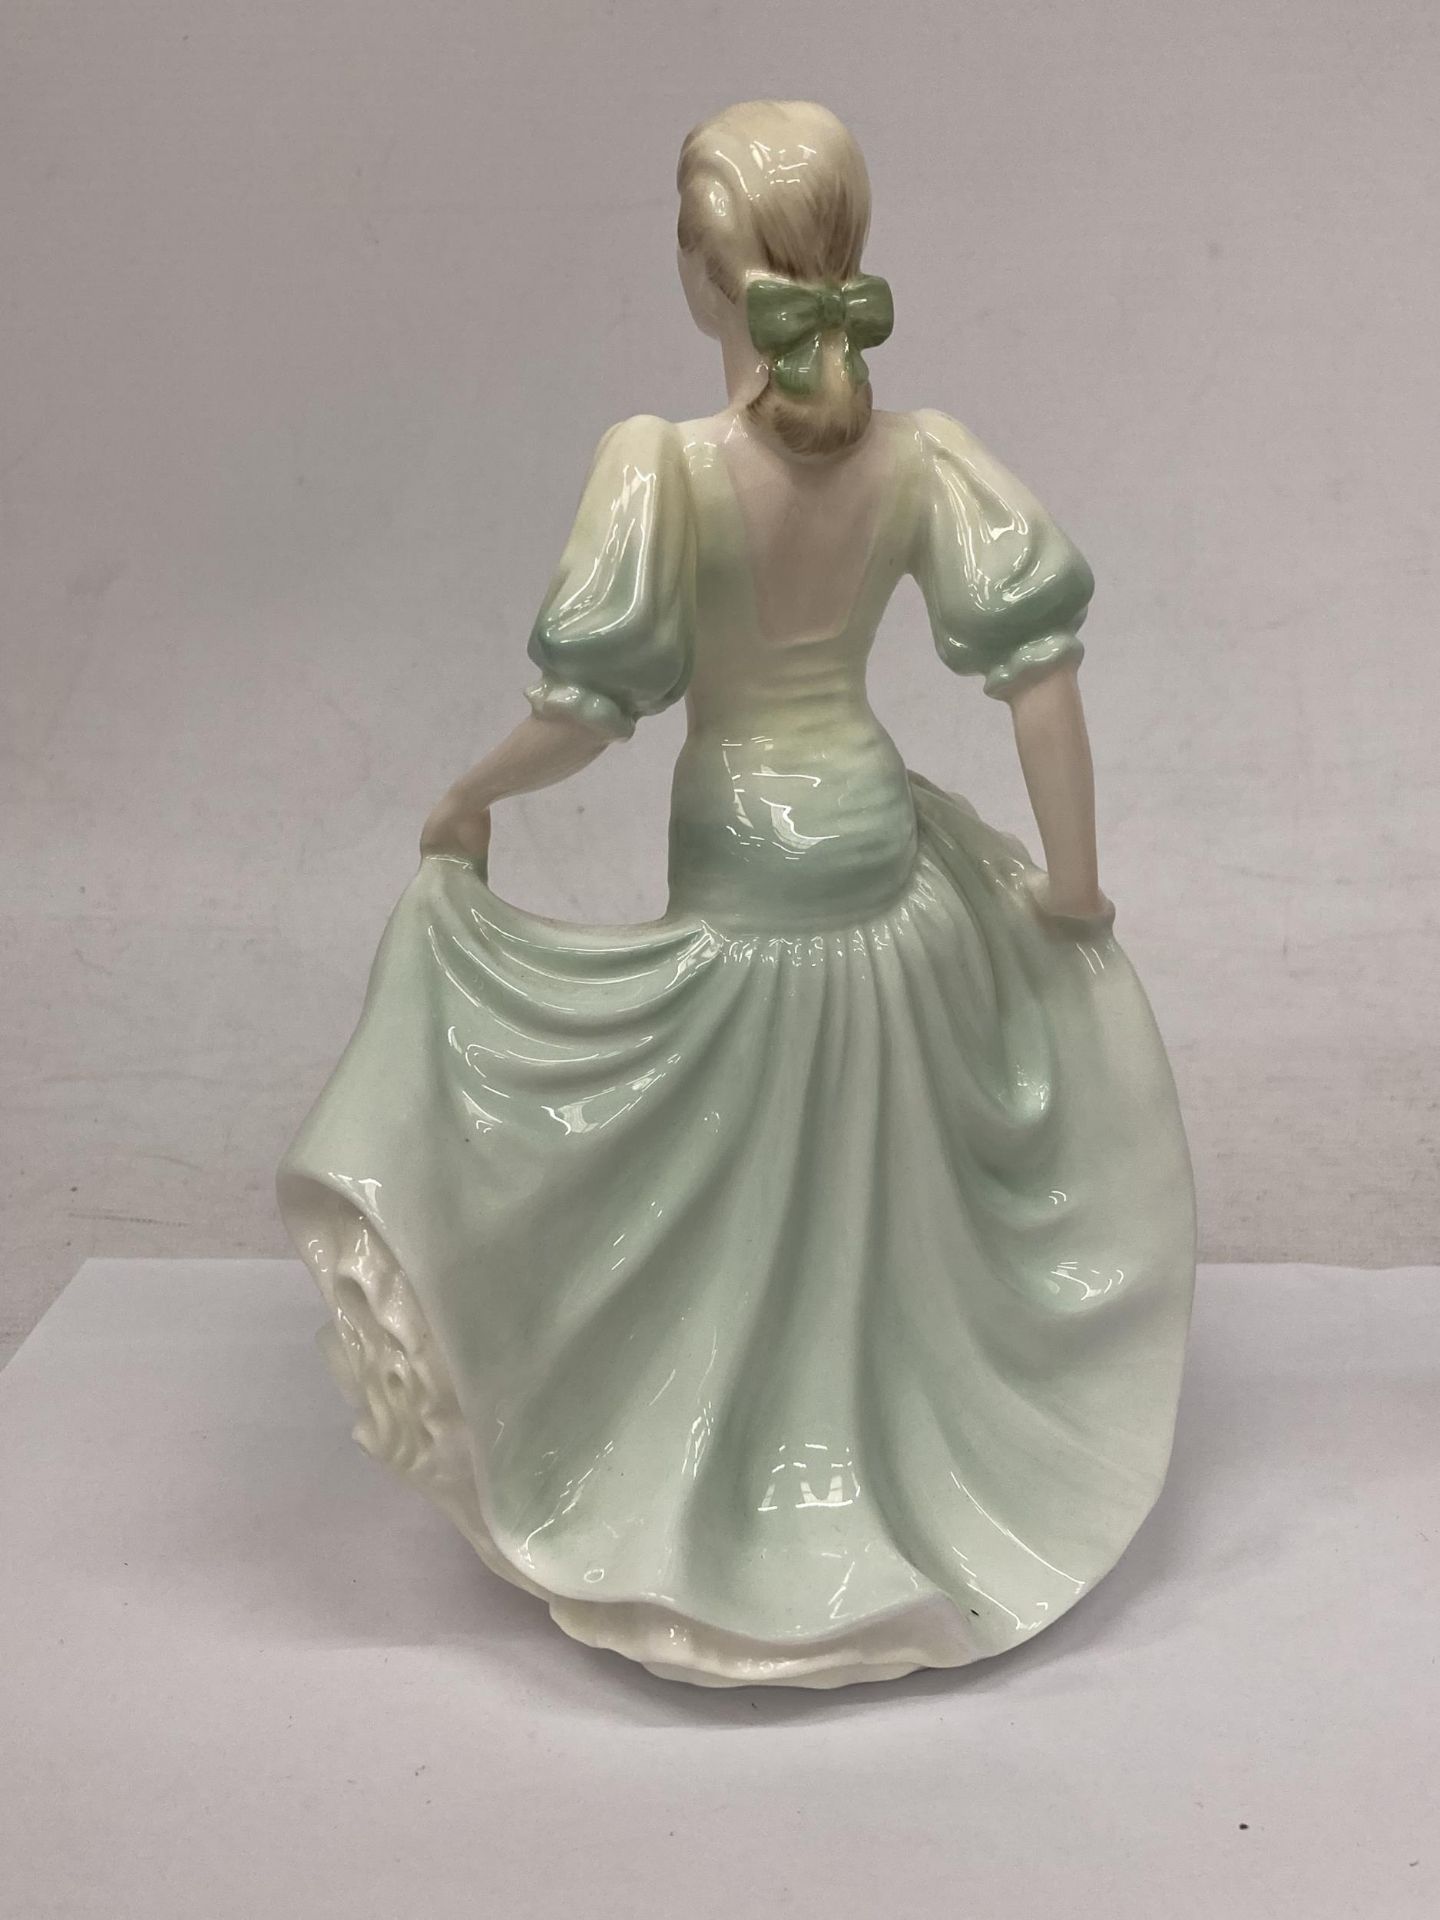 A COALPORT FIGURINE FROM THE LADIES OF FASHION "HONEYMOON" - Image 3 of 4